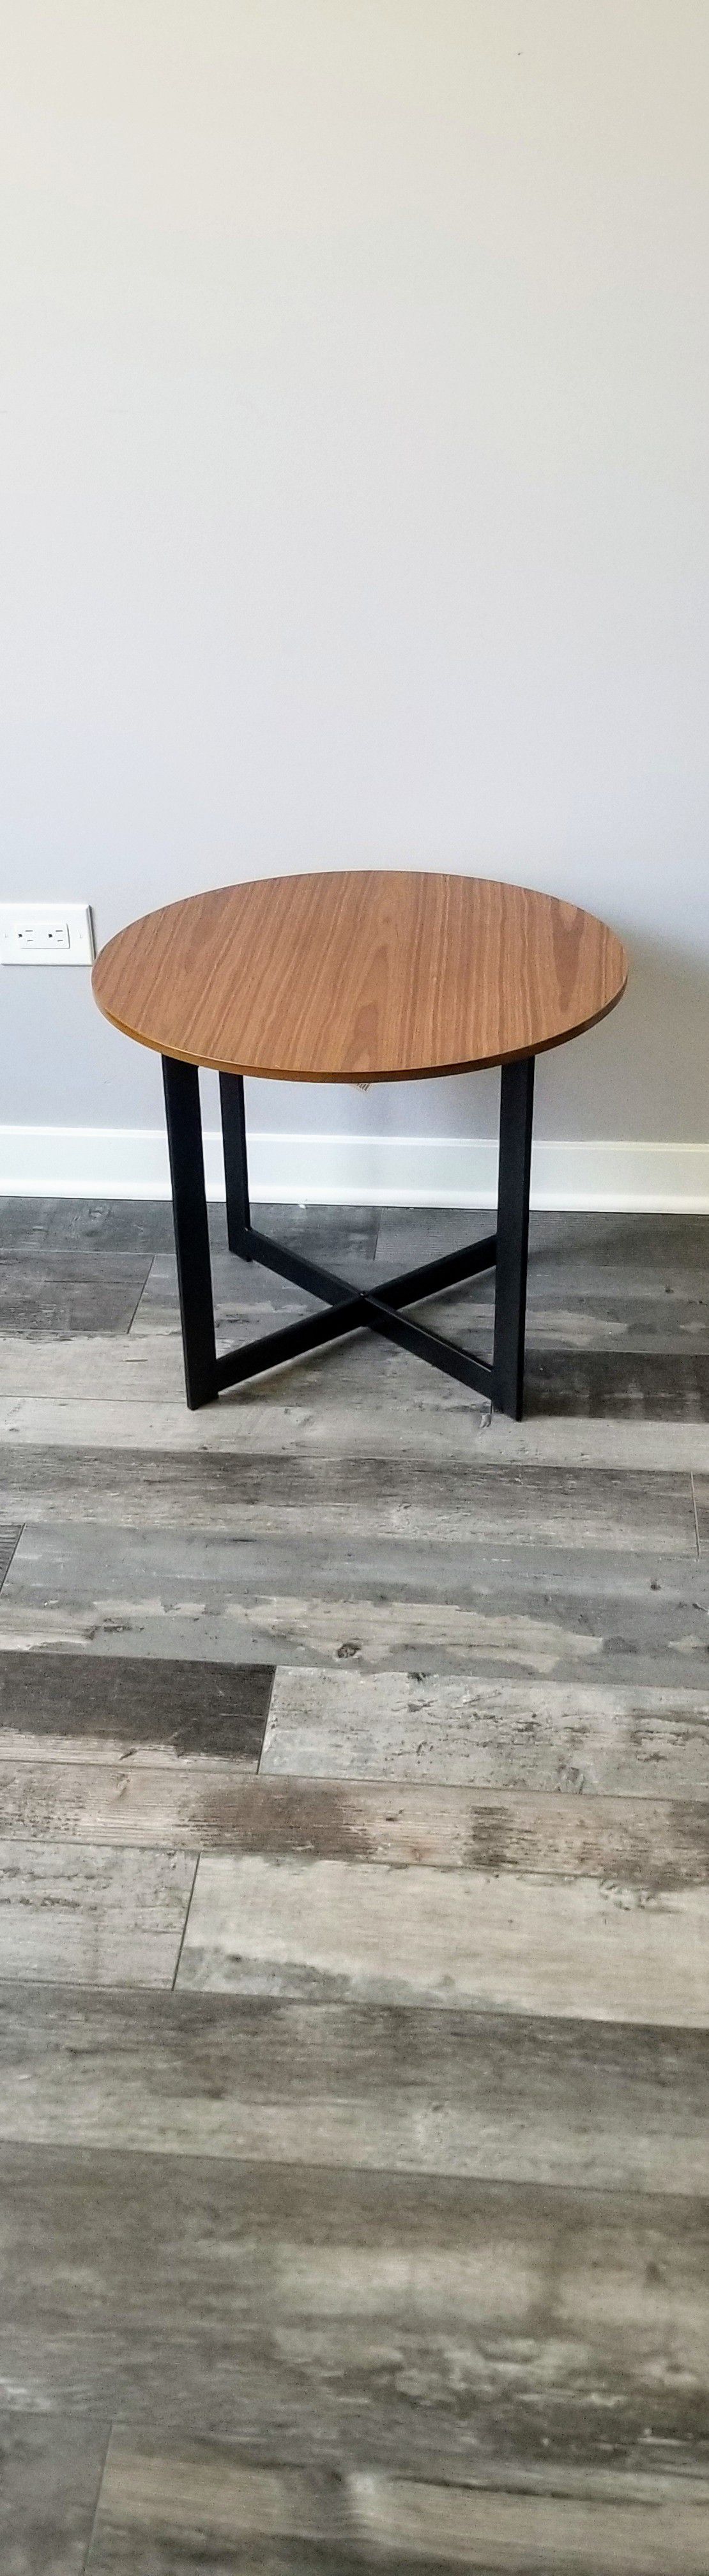 End table plant stand walnut and black